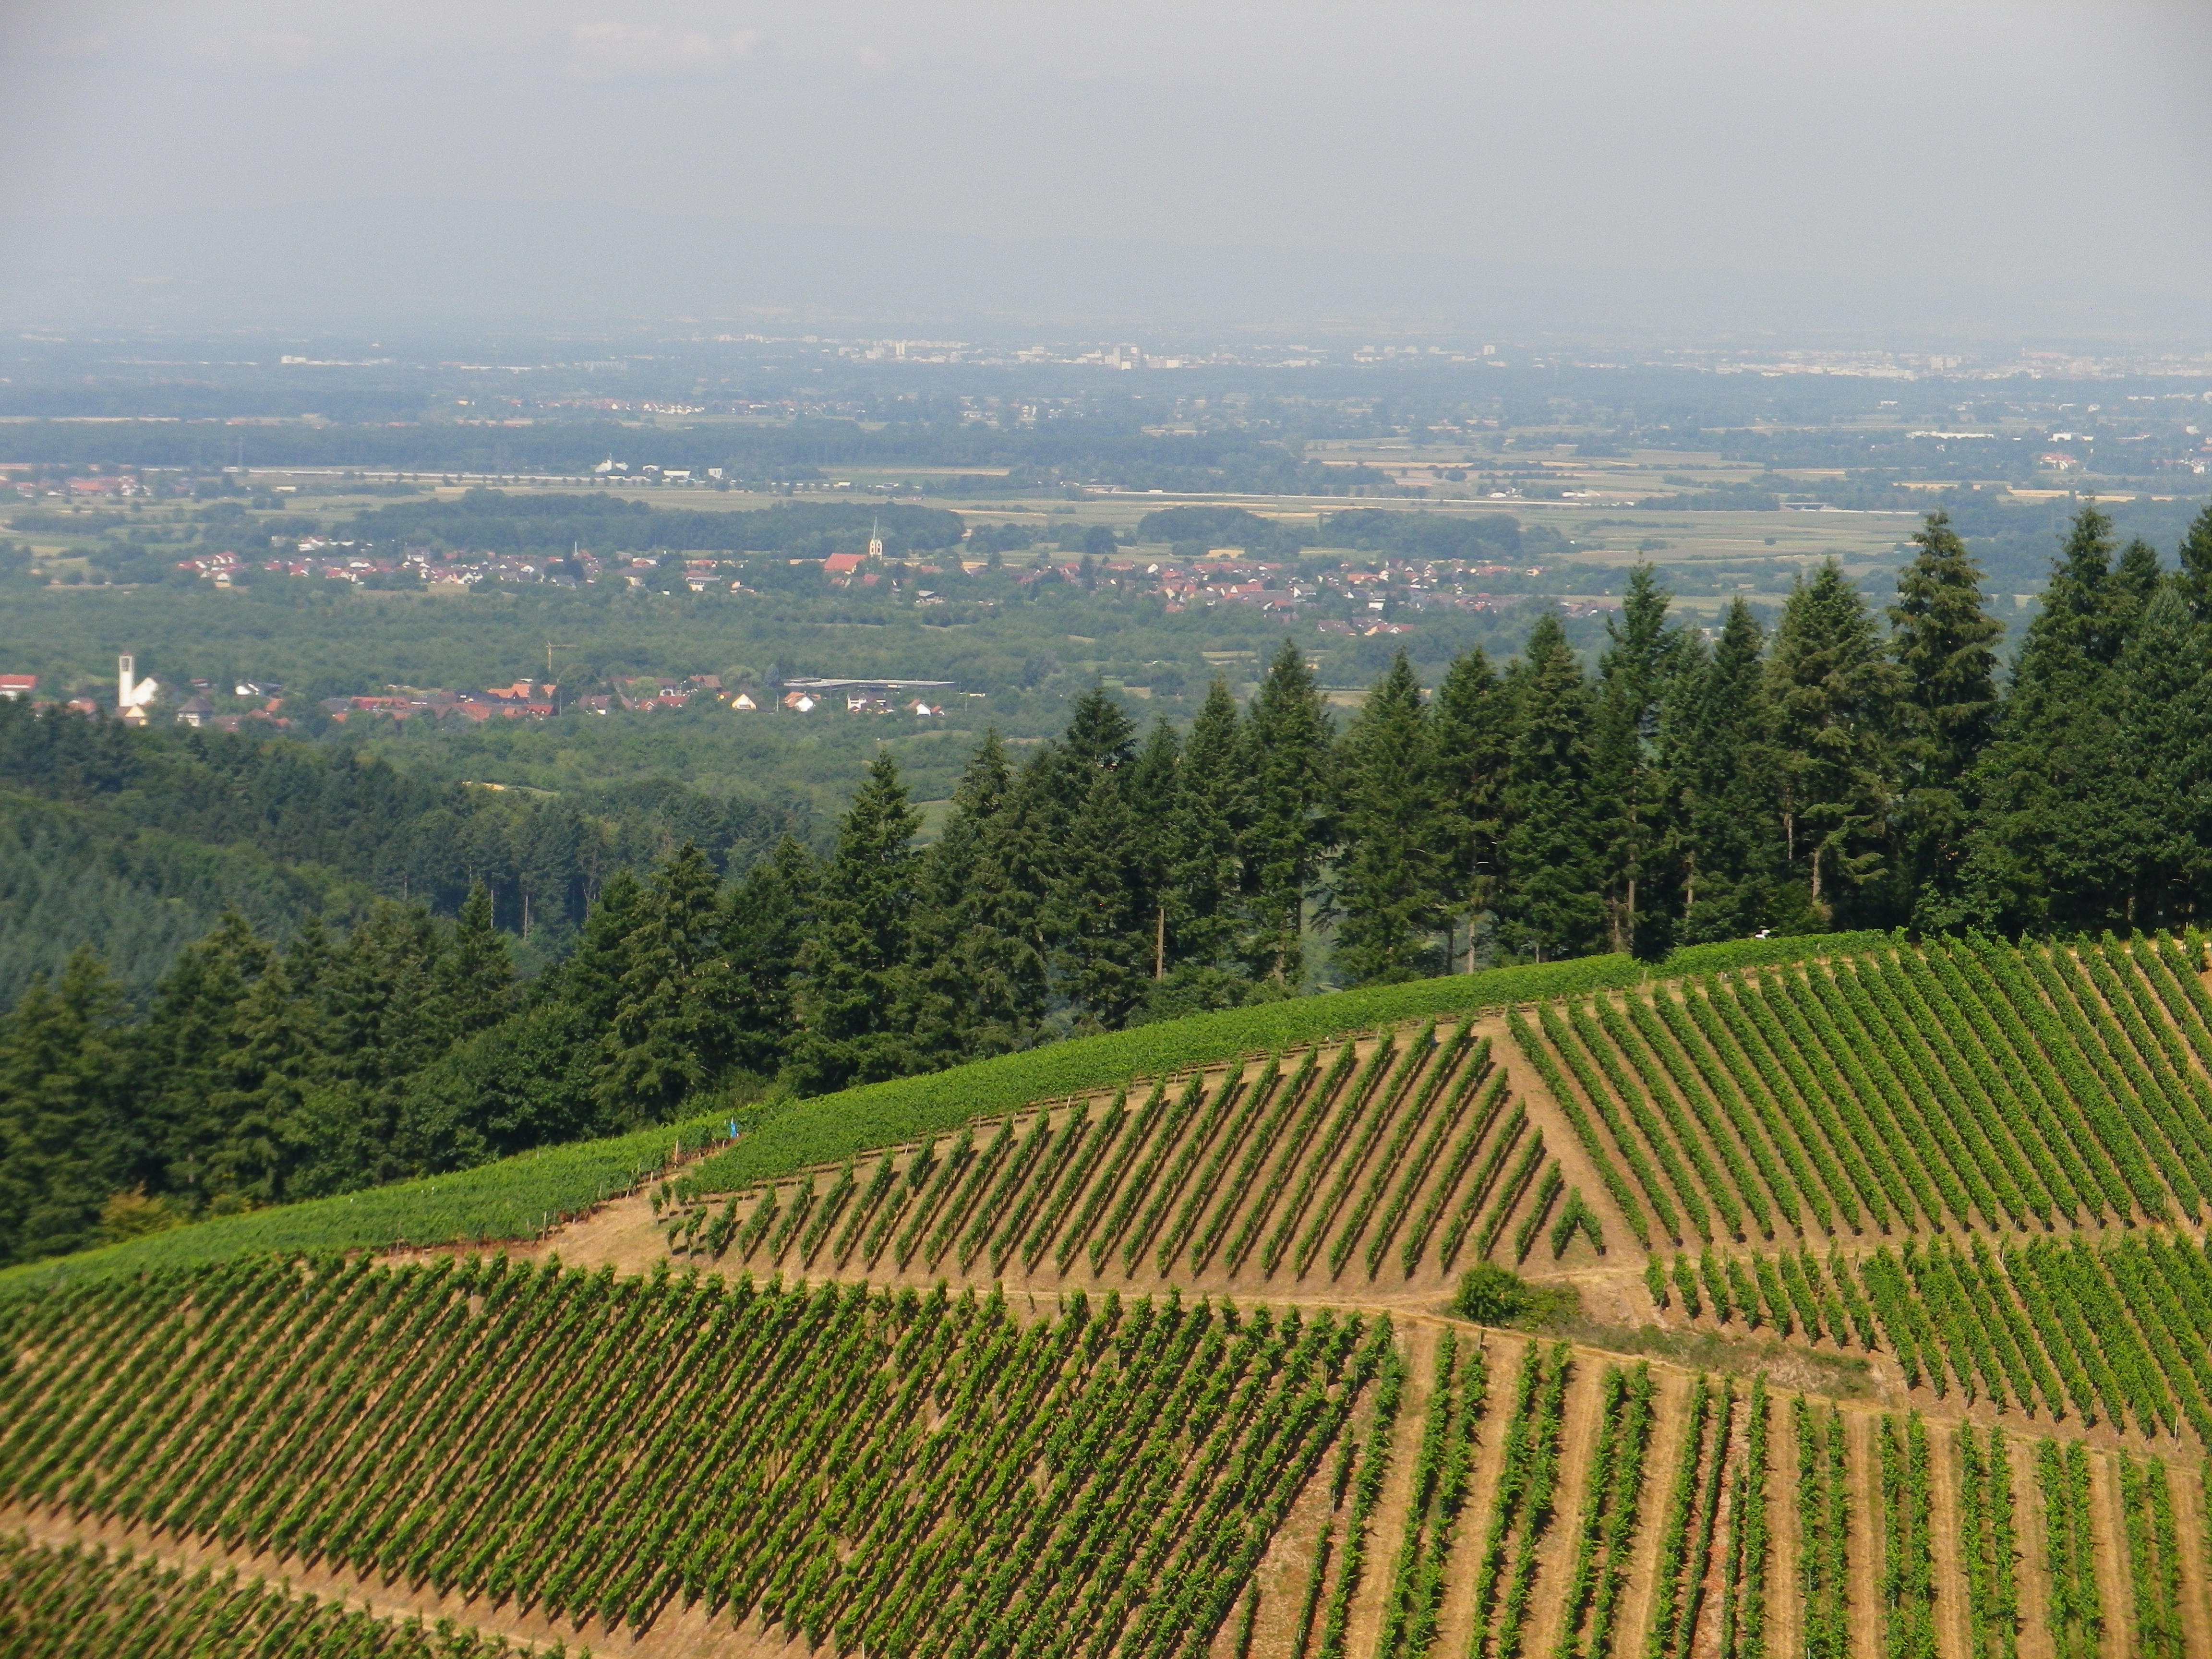 From the Vines to the Rhine and Beyond